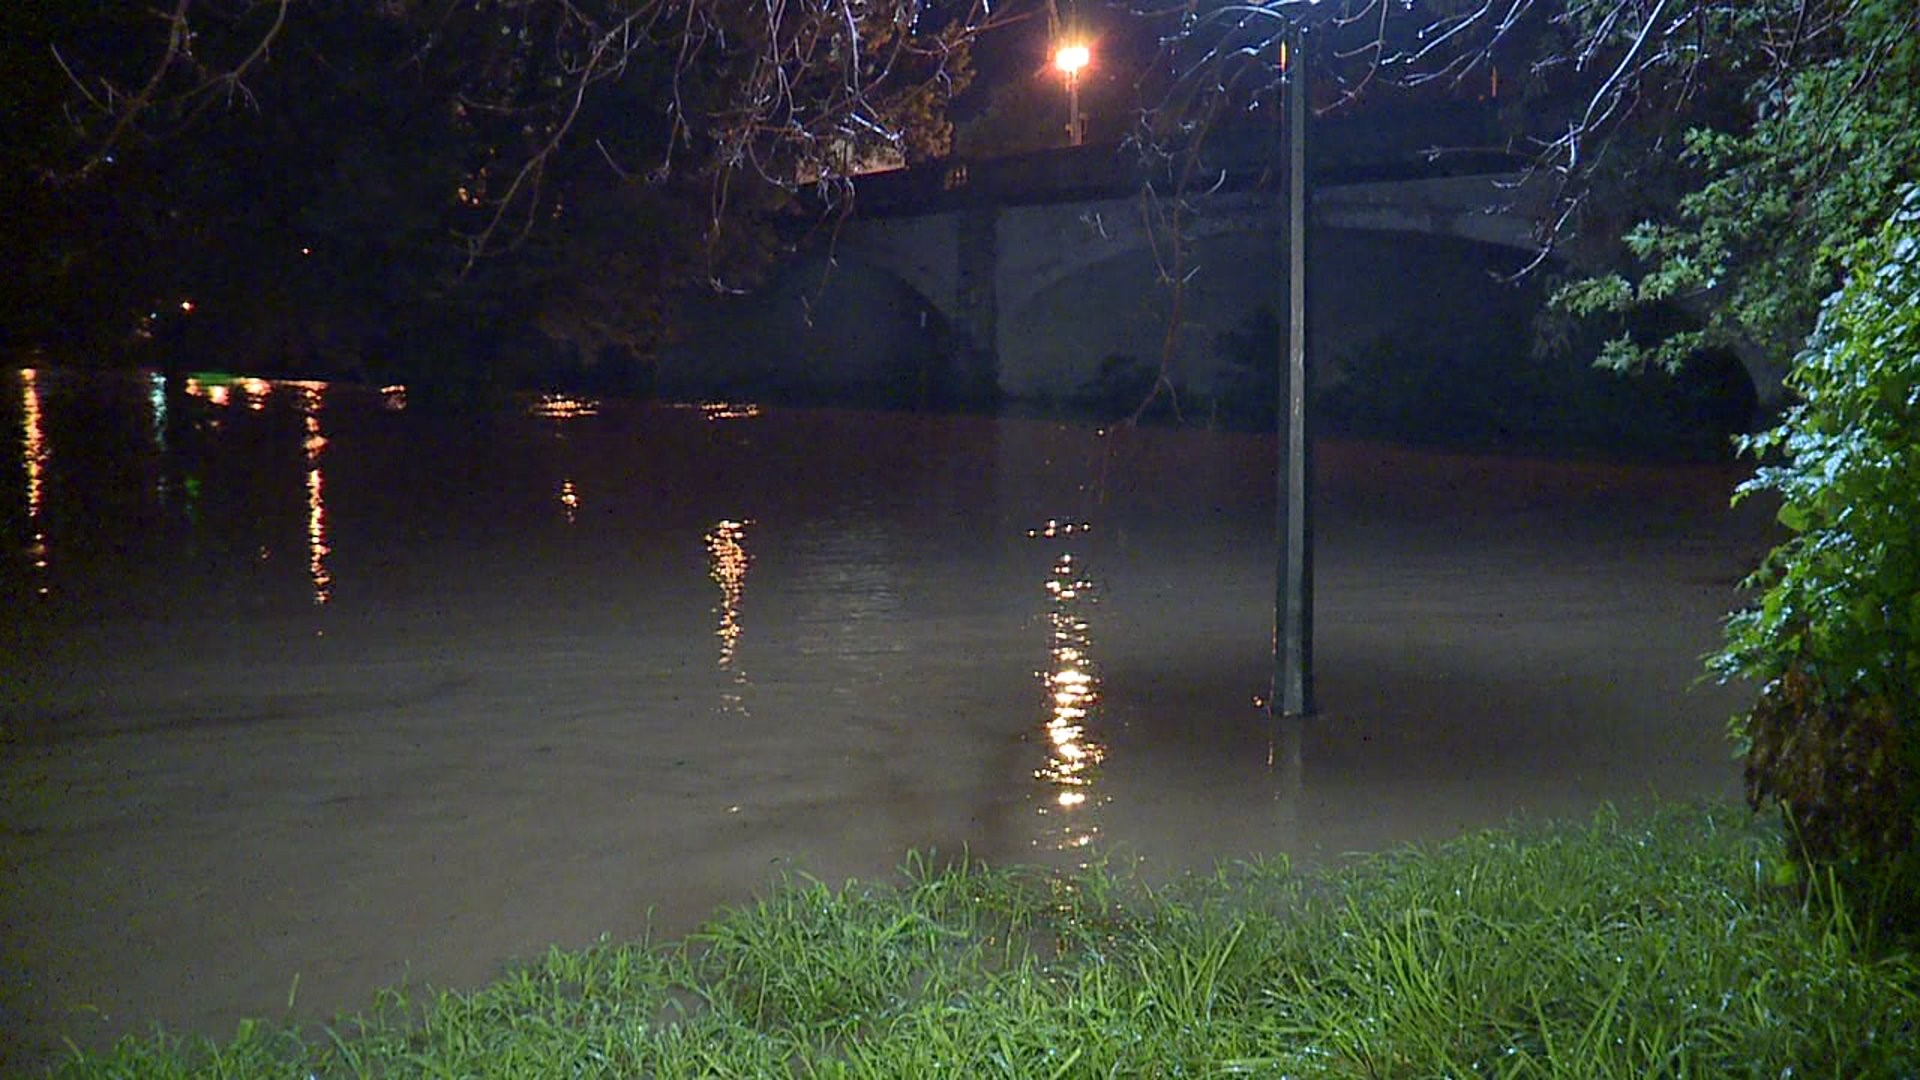 Nesbitt Park in Wilkes-Barre Closed Due to Flooding